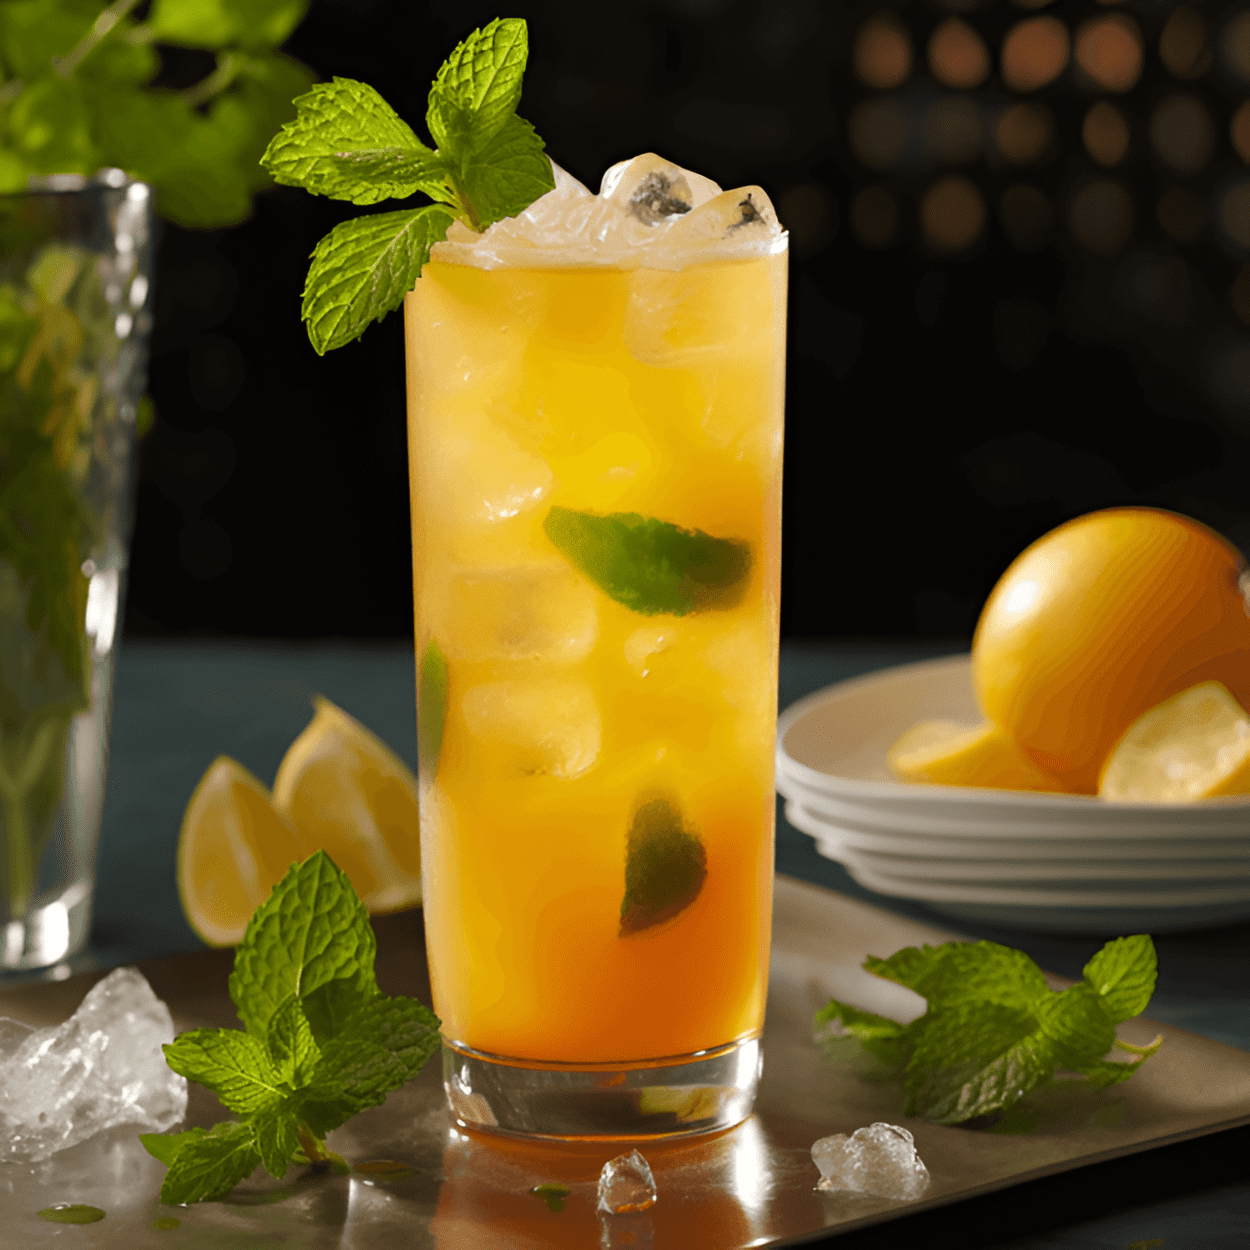 The Papaya Passion is a sweet and slightly tangy cocktail with a strong fruity flavor. The sweetness of the papaya is balanced by the tartness of the lime, while the rum adds a warm, smooth finish.